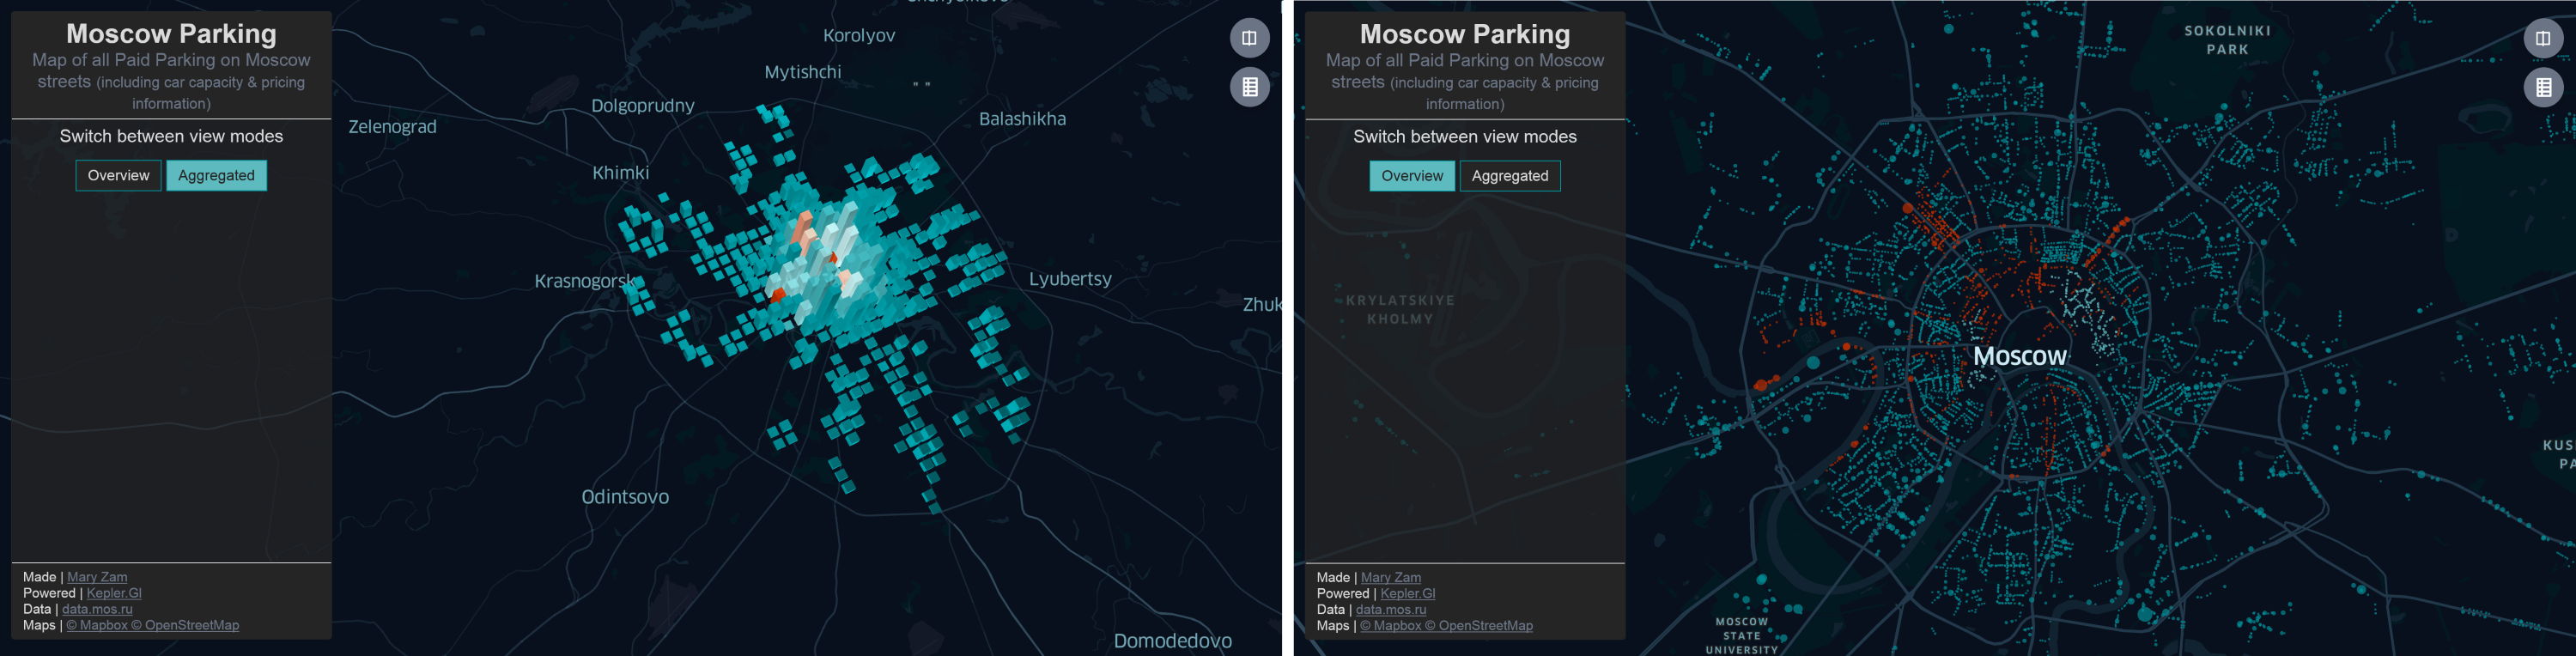 Demo app about paid parking in Moscow